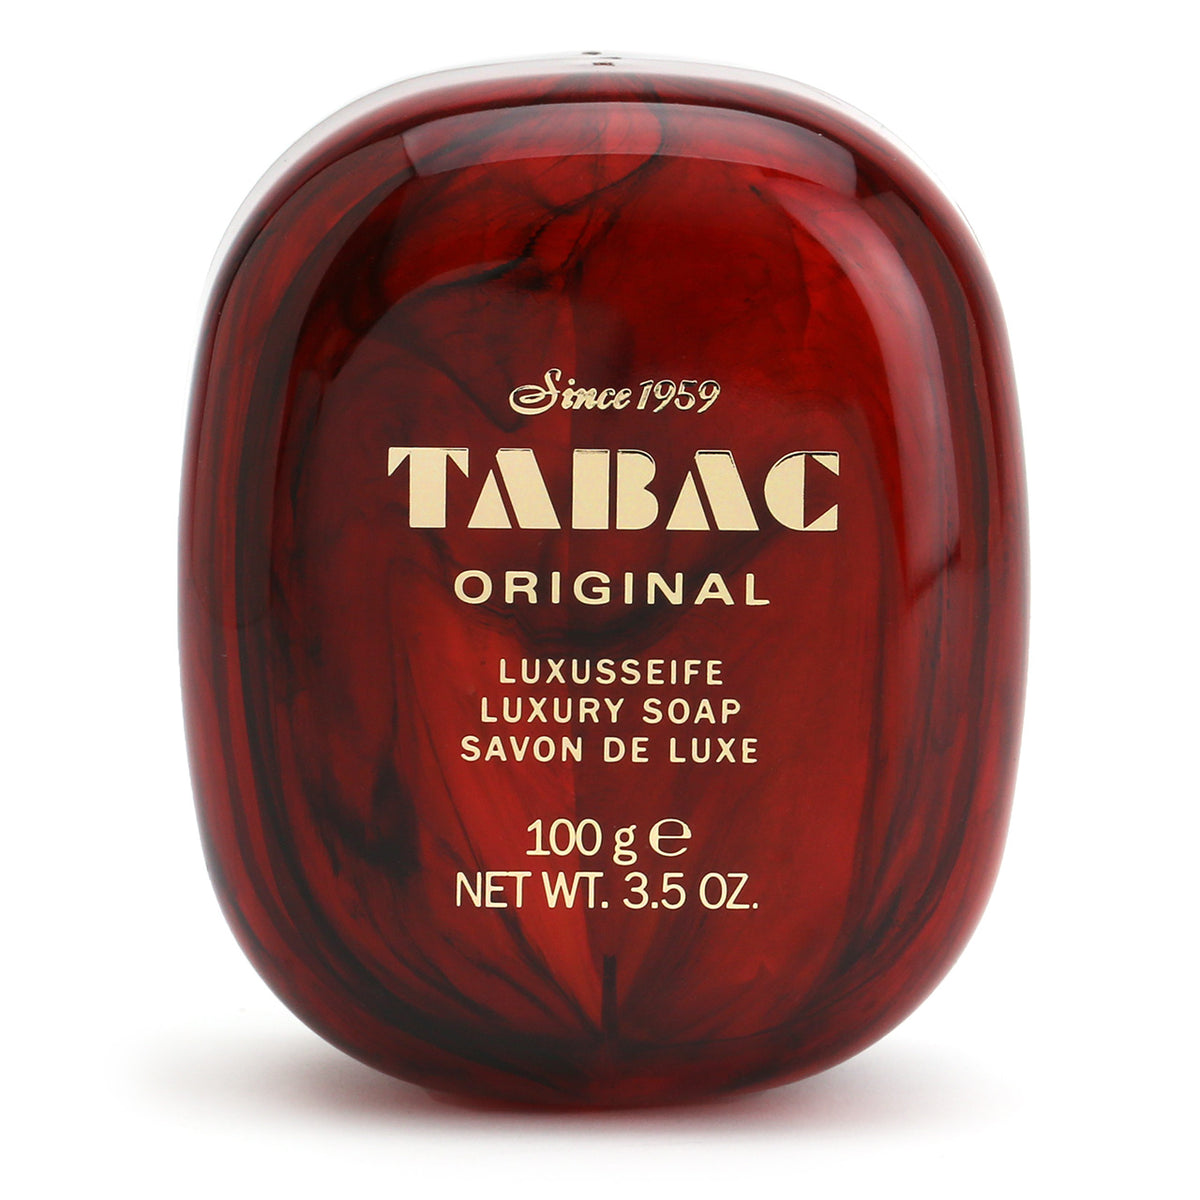 Tabac Original Luxury Soap 100g in a tortoiseshell container makes it easy to take on a holiday